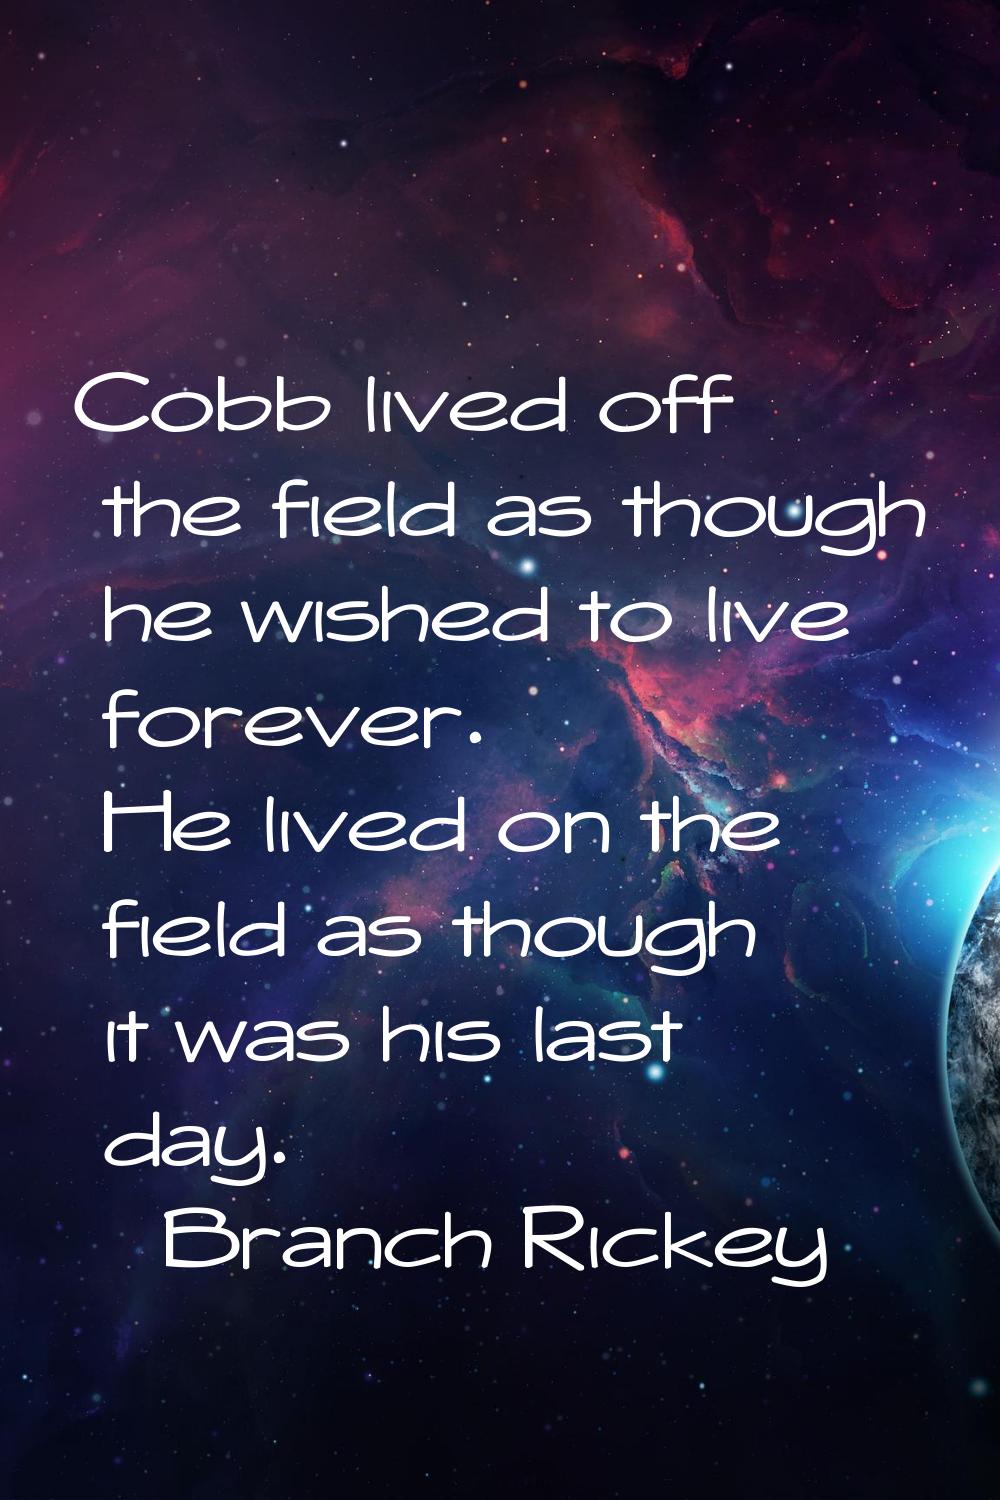 Cobb lived off the field as though he wished to live forever. He lived on the field as though it wa